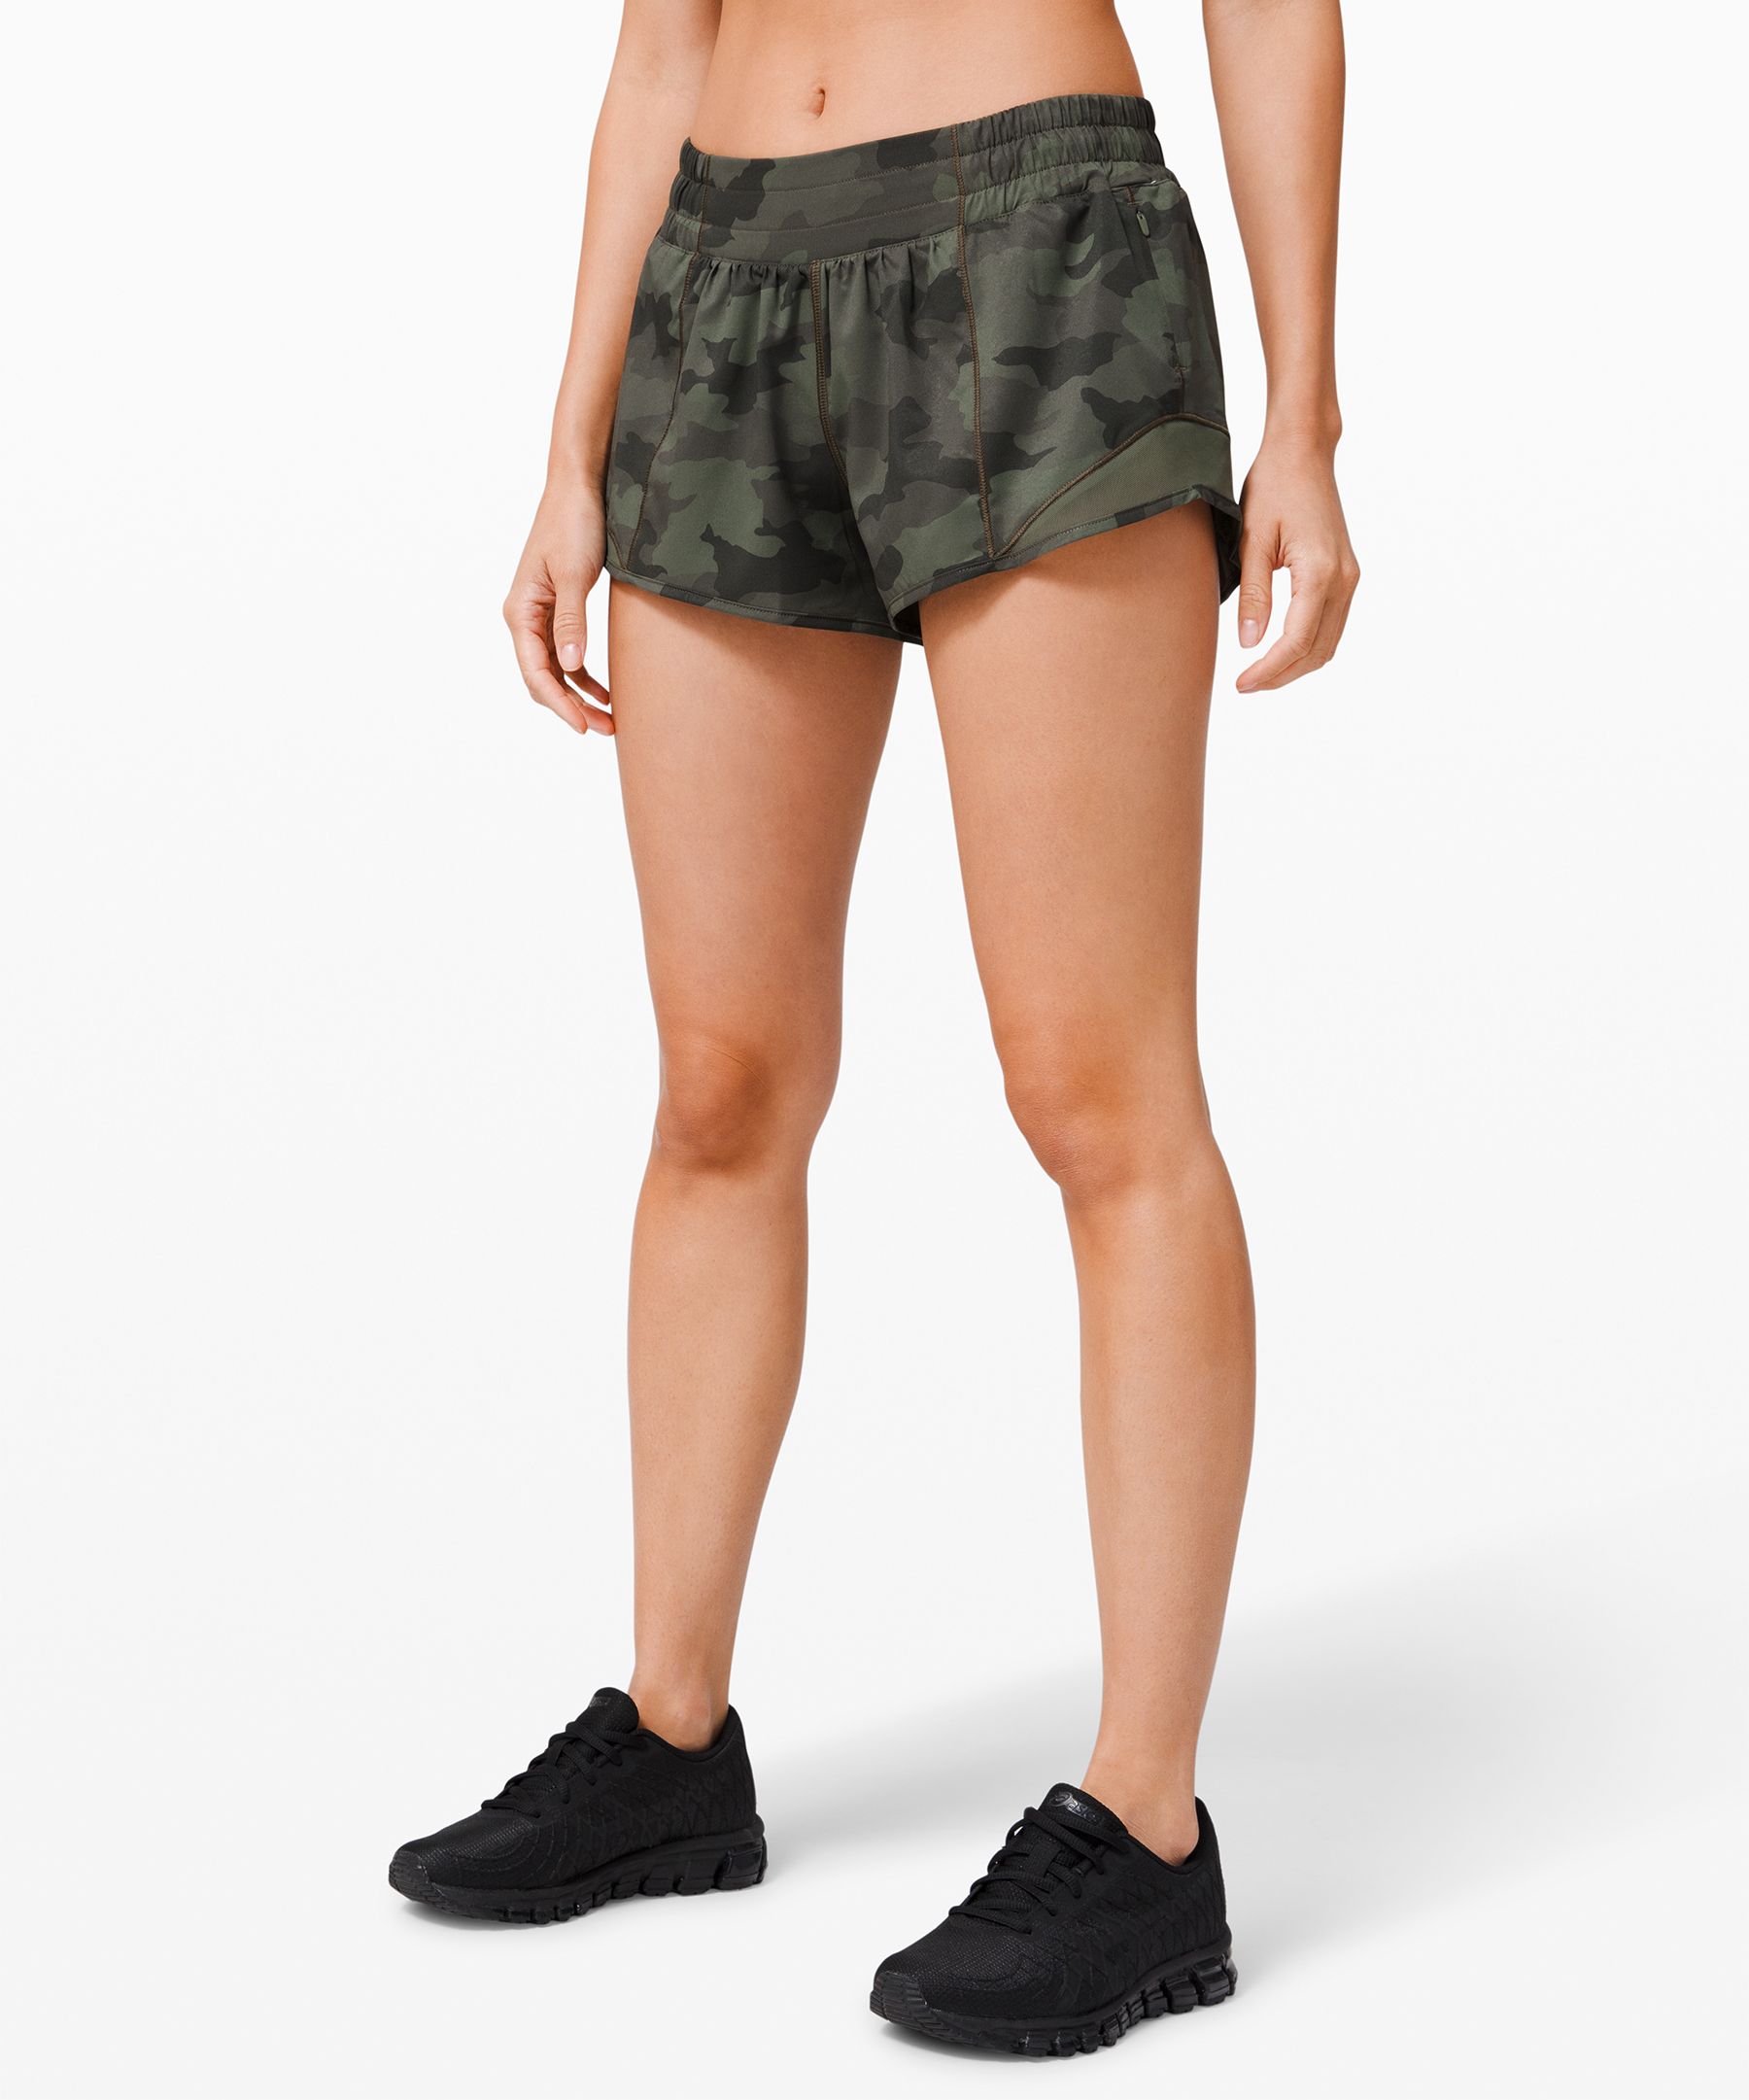 Lululemon Hotty Hot Low-rise Lined Shorts 2.5" In Heritage 365 Camo Green Twill